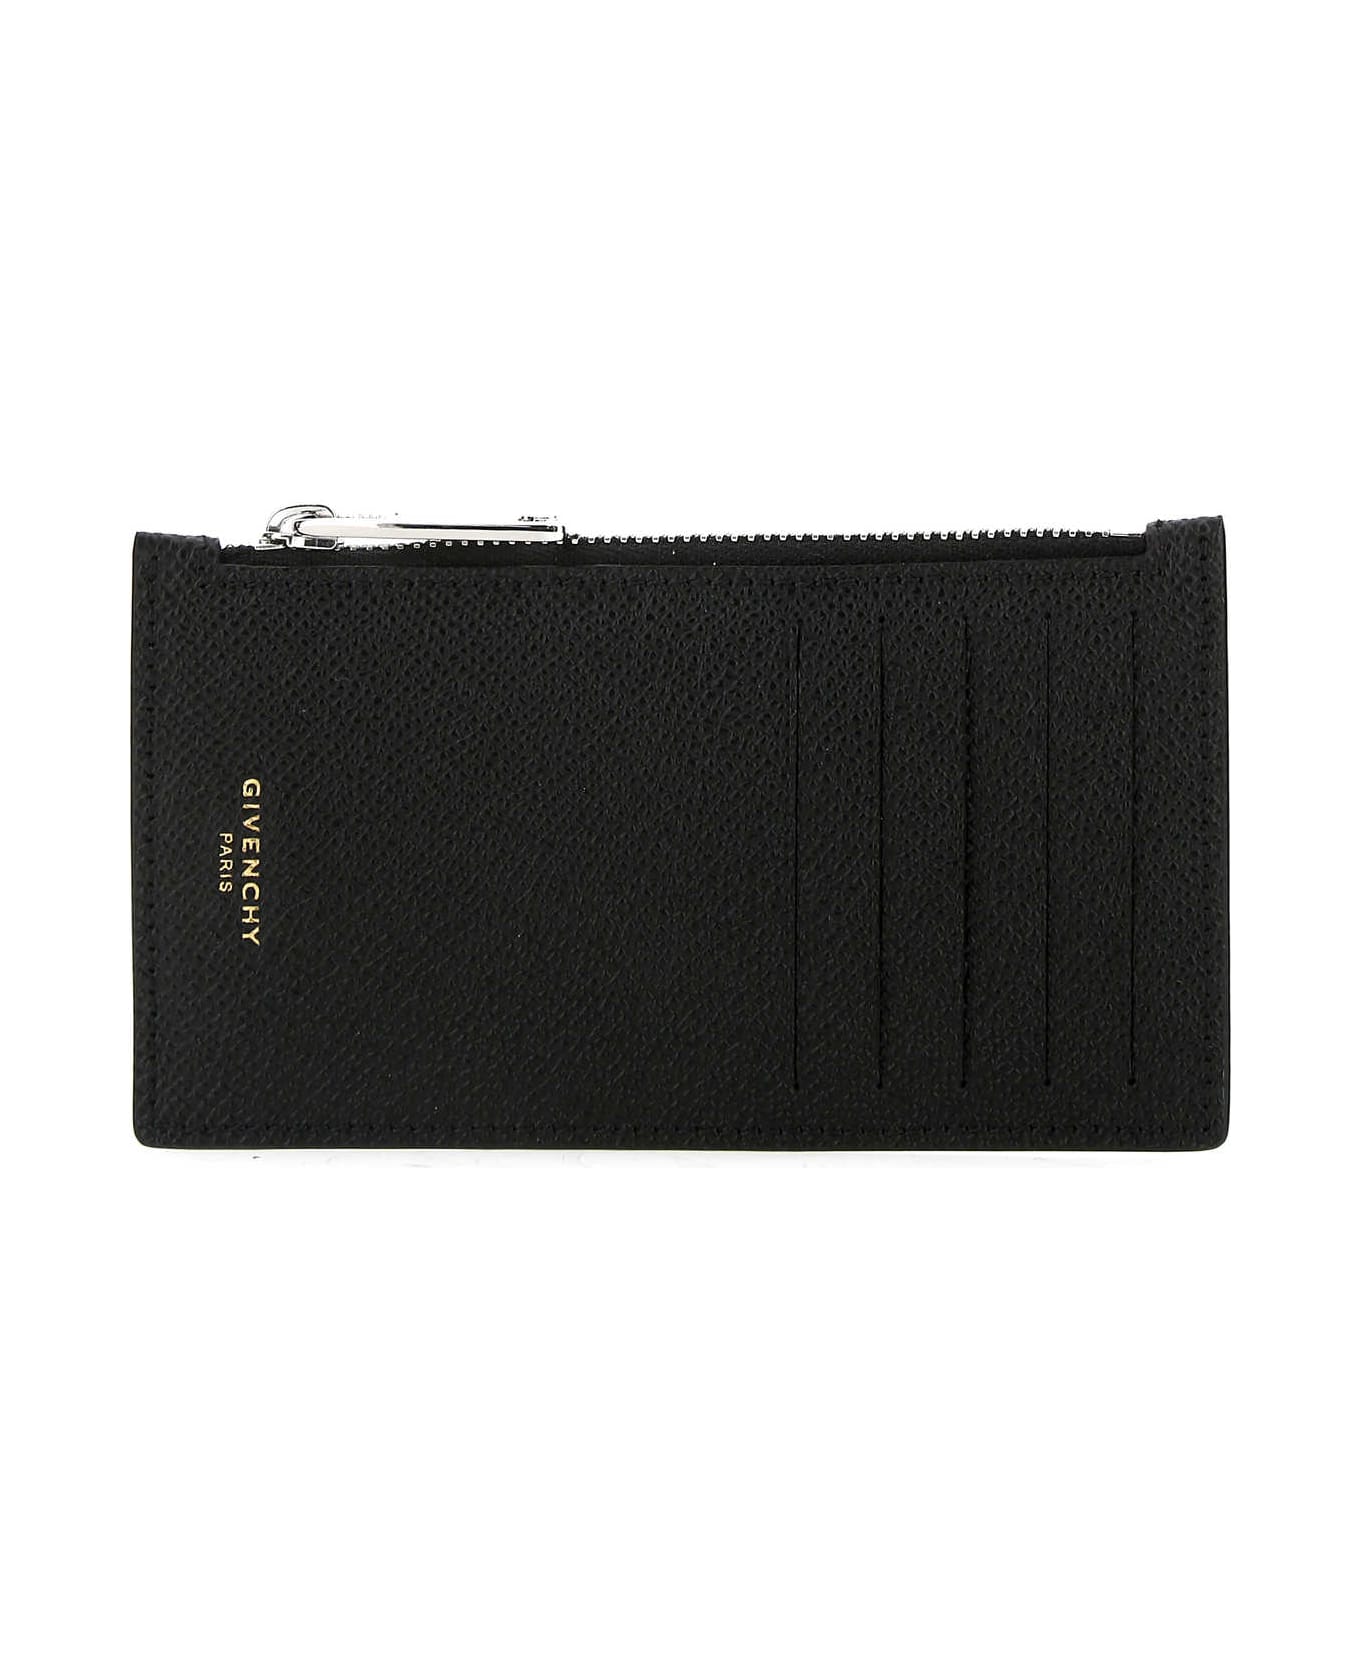 Givenchy Black Leather Card Holder - 001 財布